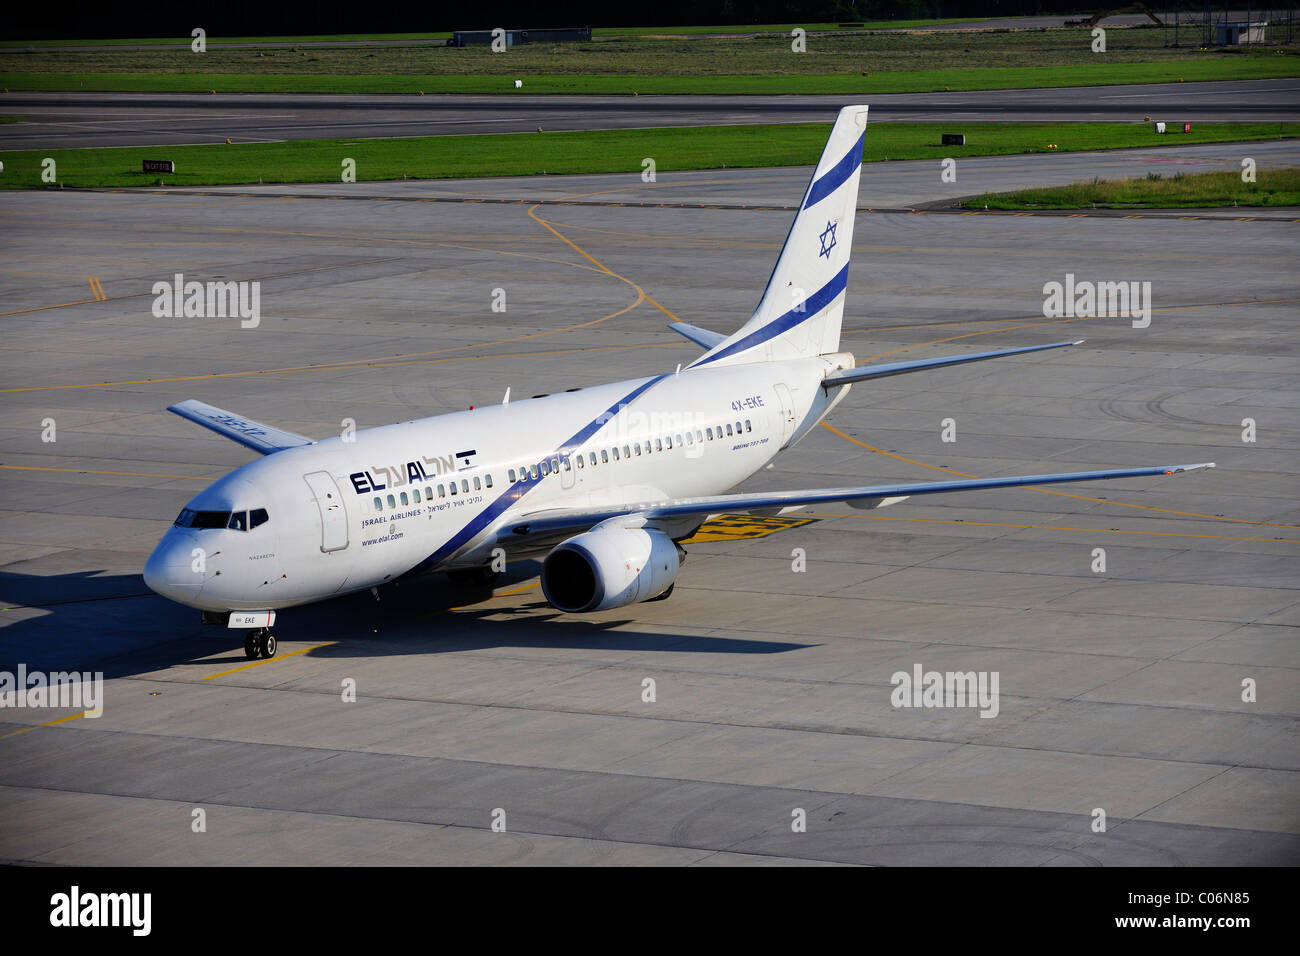 Boeing 737-700 from Israel Airlines at Zurich Airport, Switzerland, Europe Stock Photo